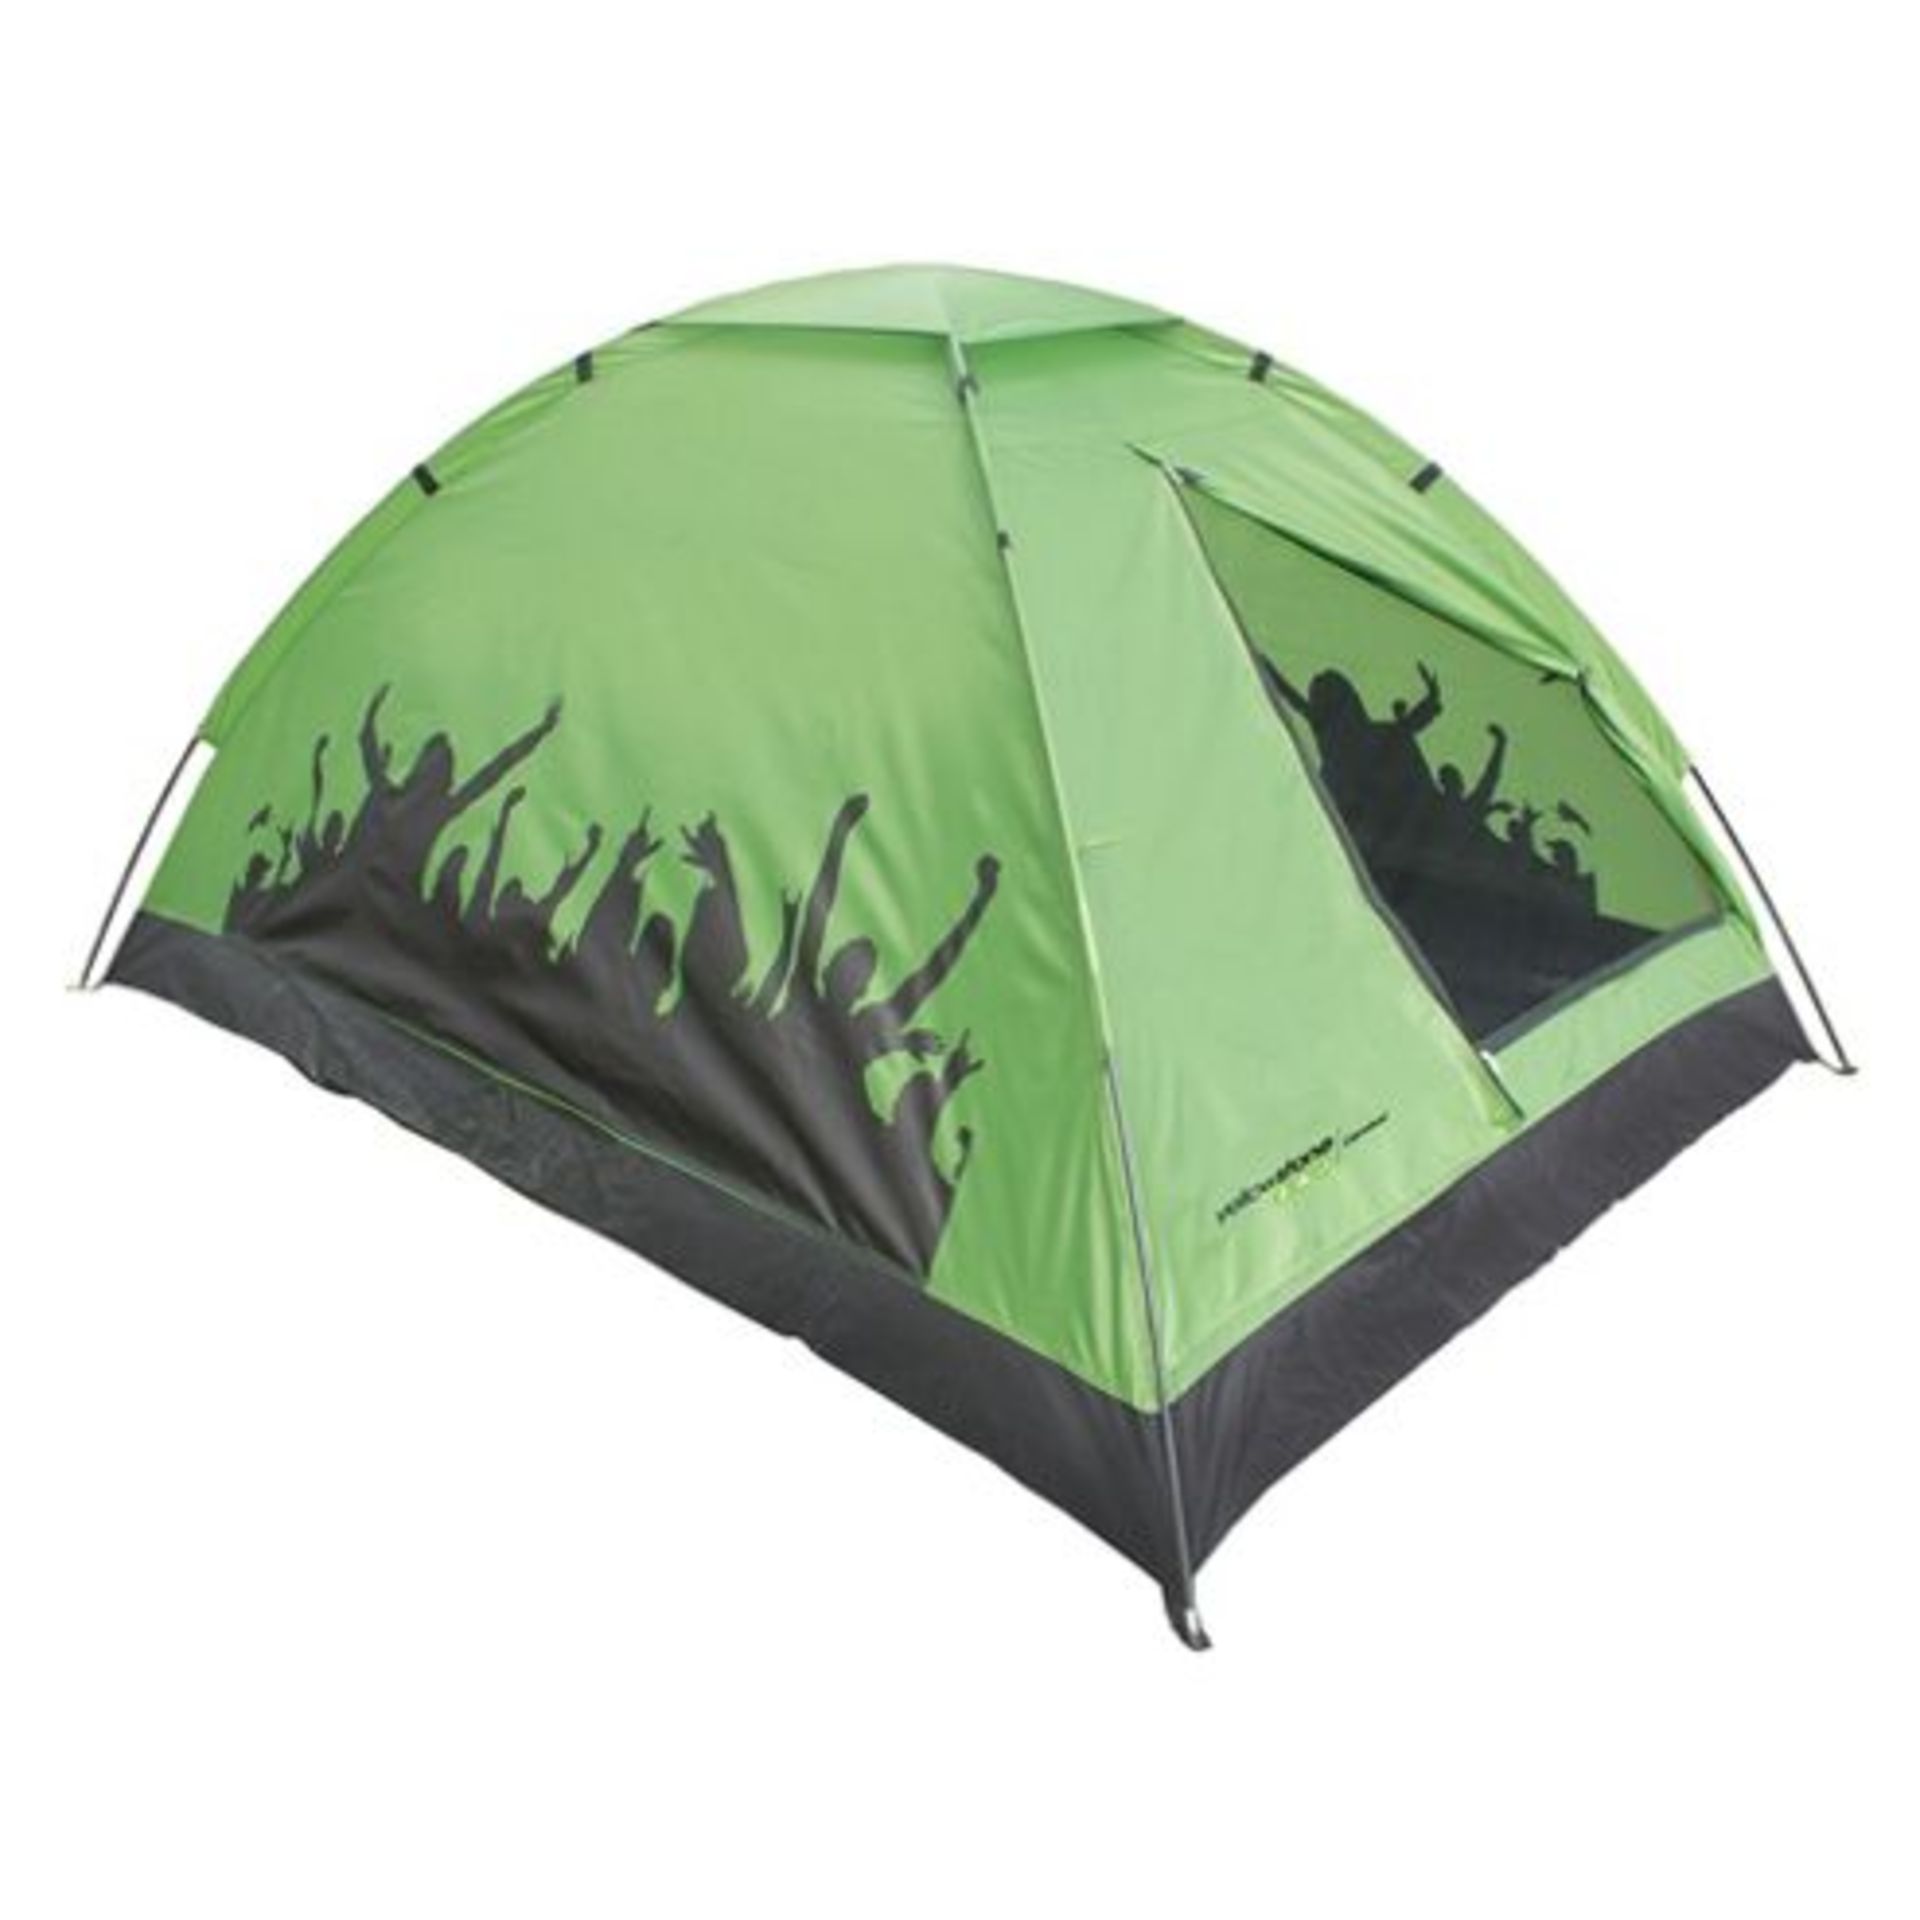 V *TRADE QTY* Brand New Two Person Silhouette Dome Tent X 5 YOUR BID PRICE TO BE MULTIPLIED BY FIVE